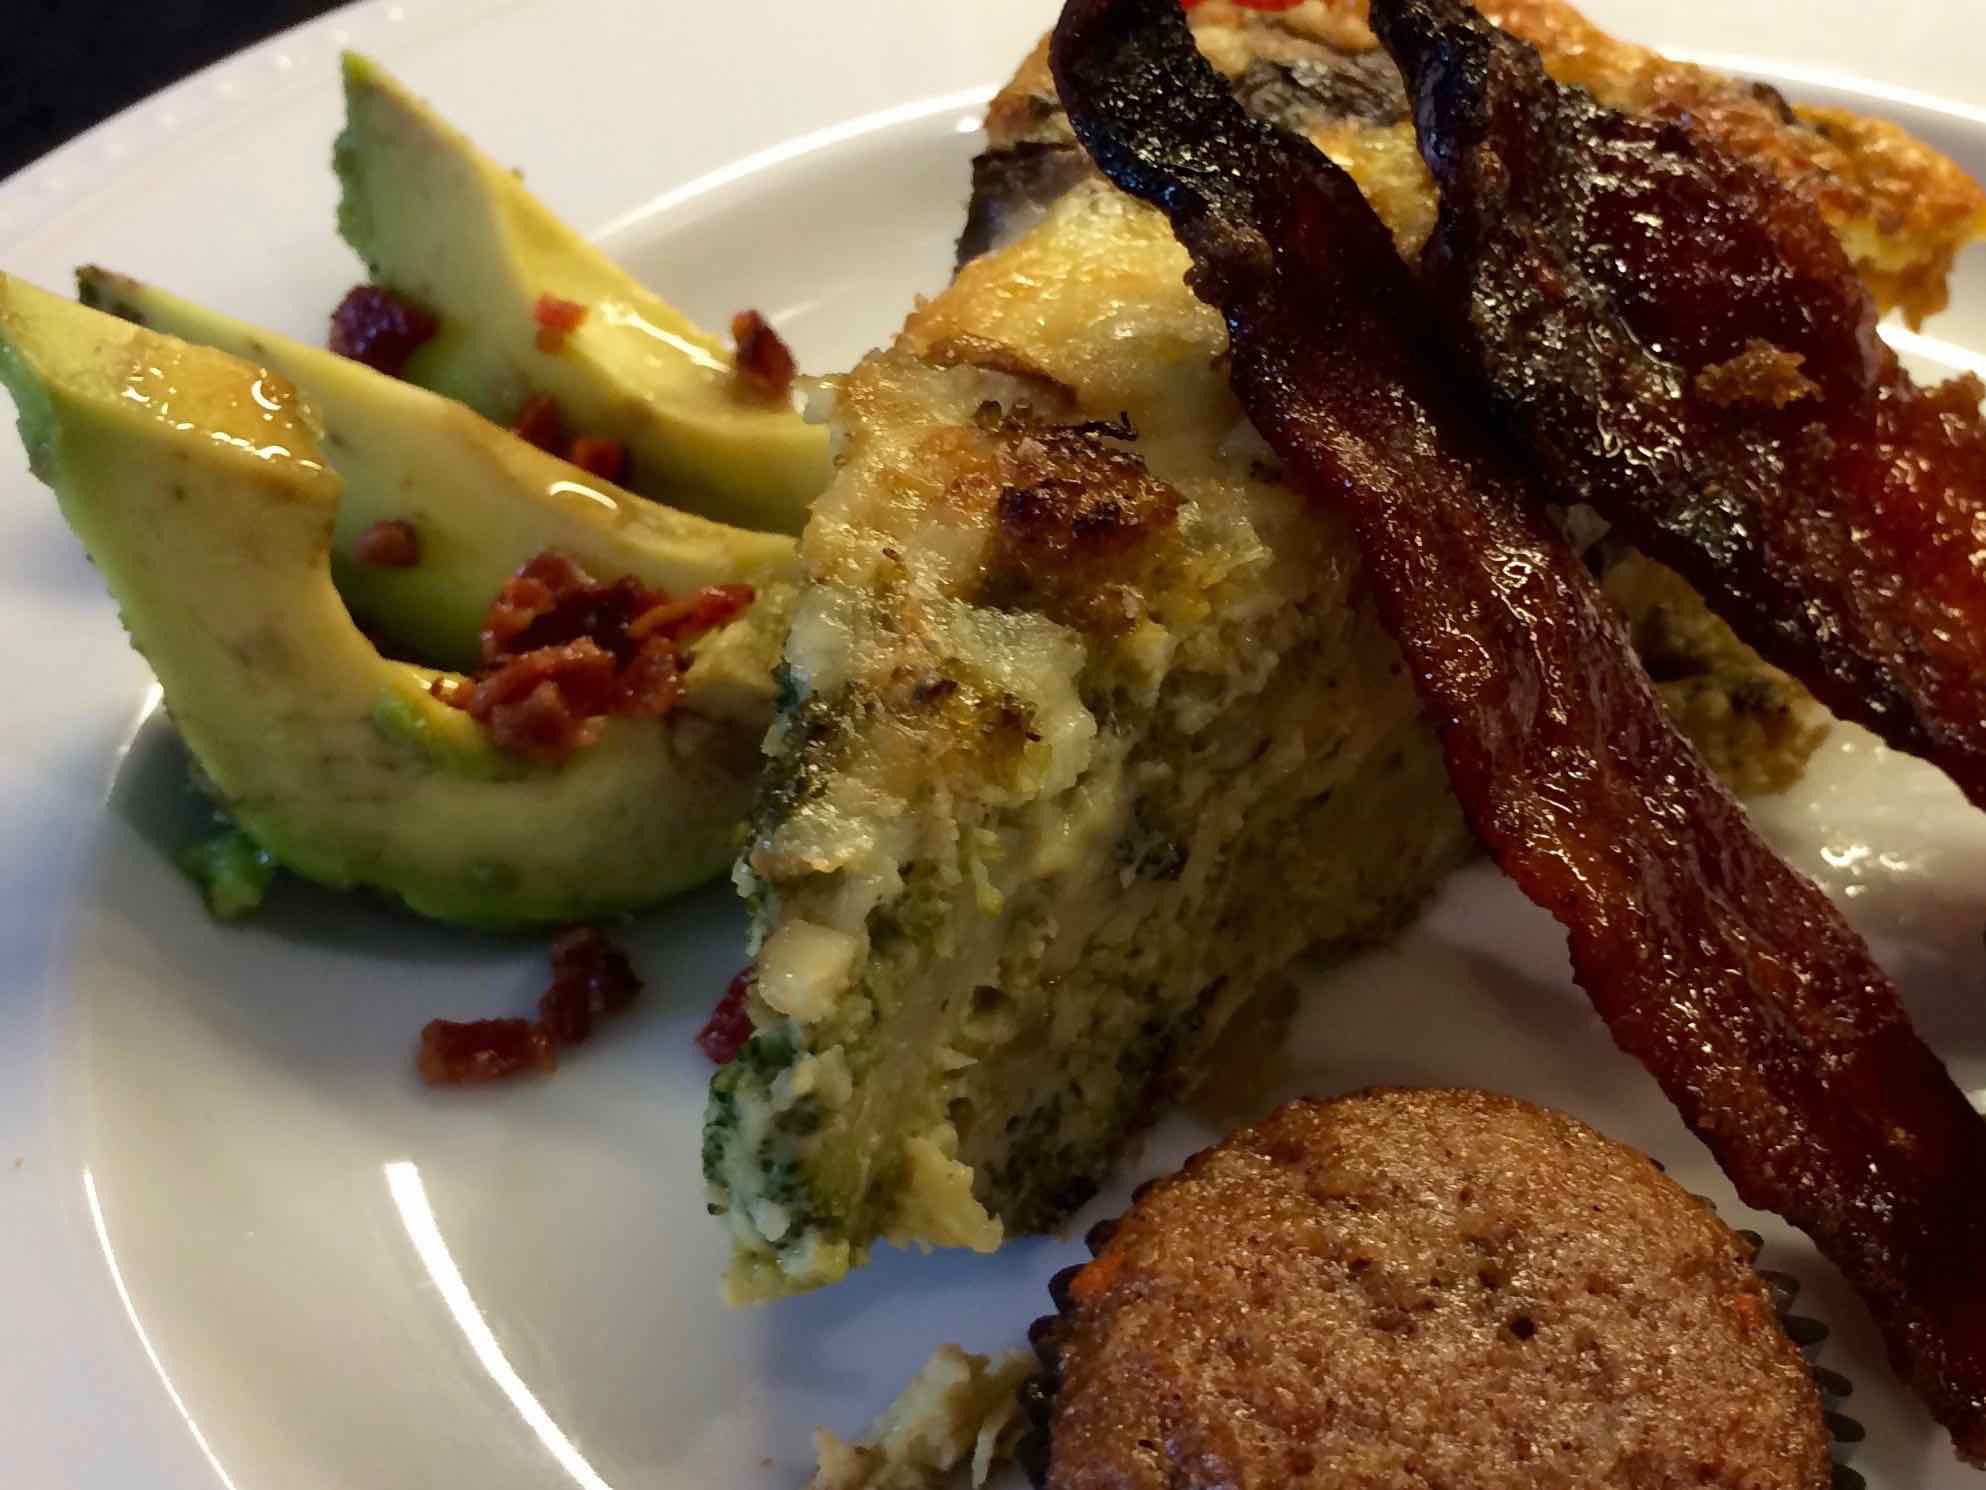 Breakfast at Coach Stop Inn - vegetable frittata with candied bacon and avocado